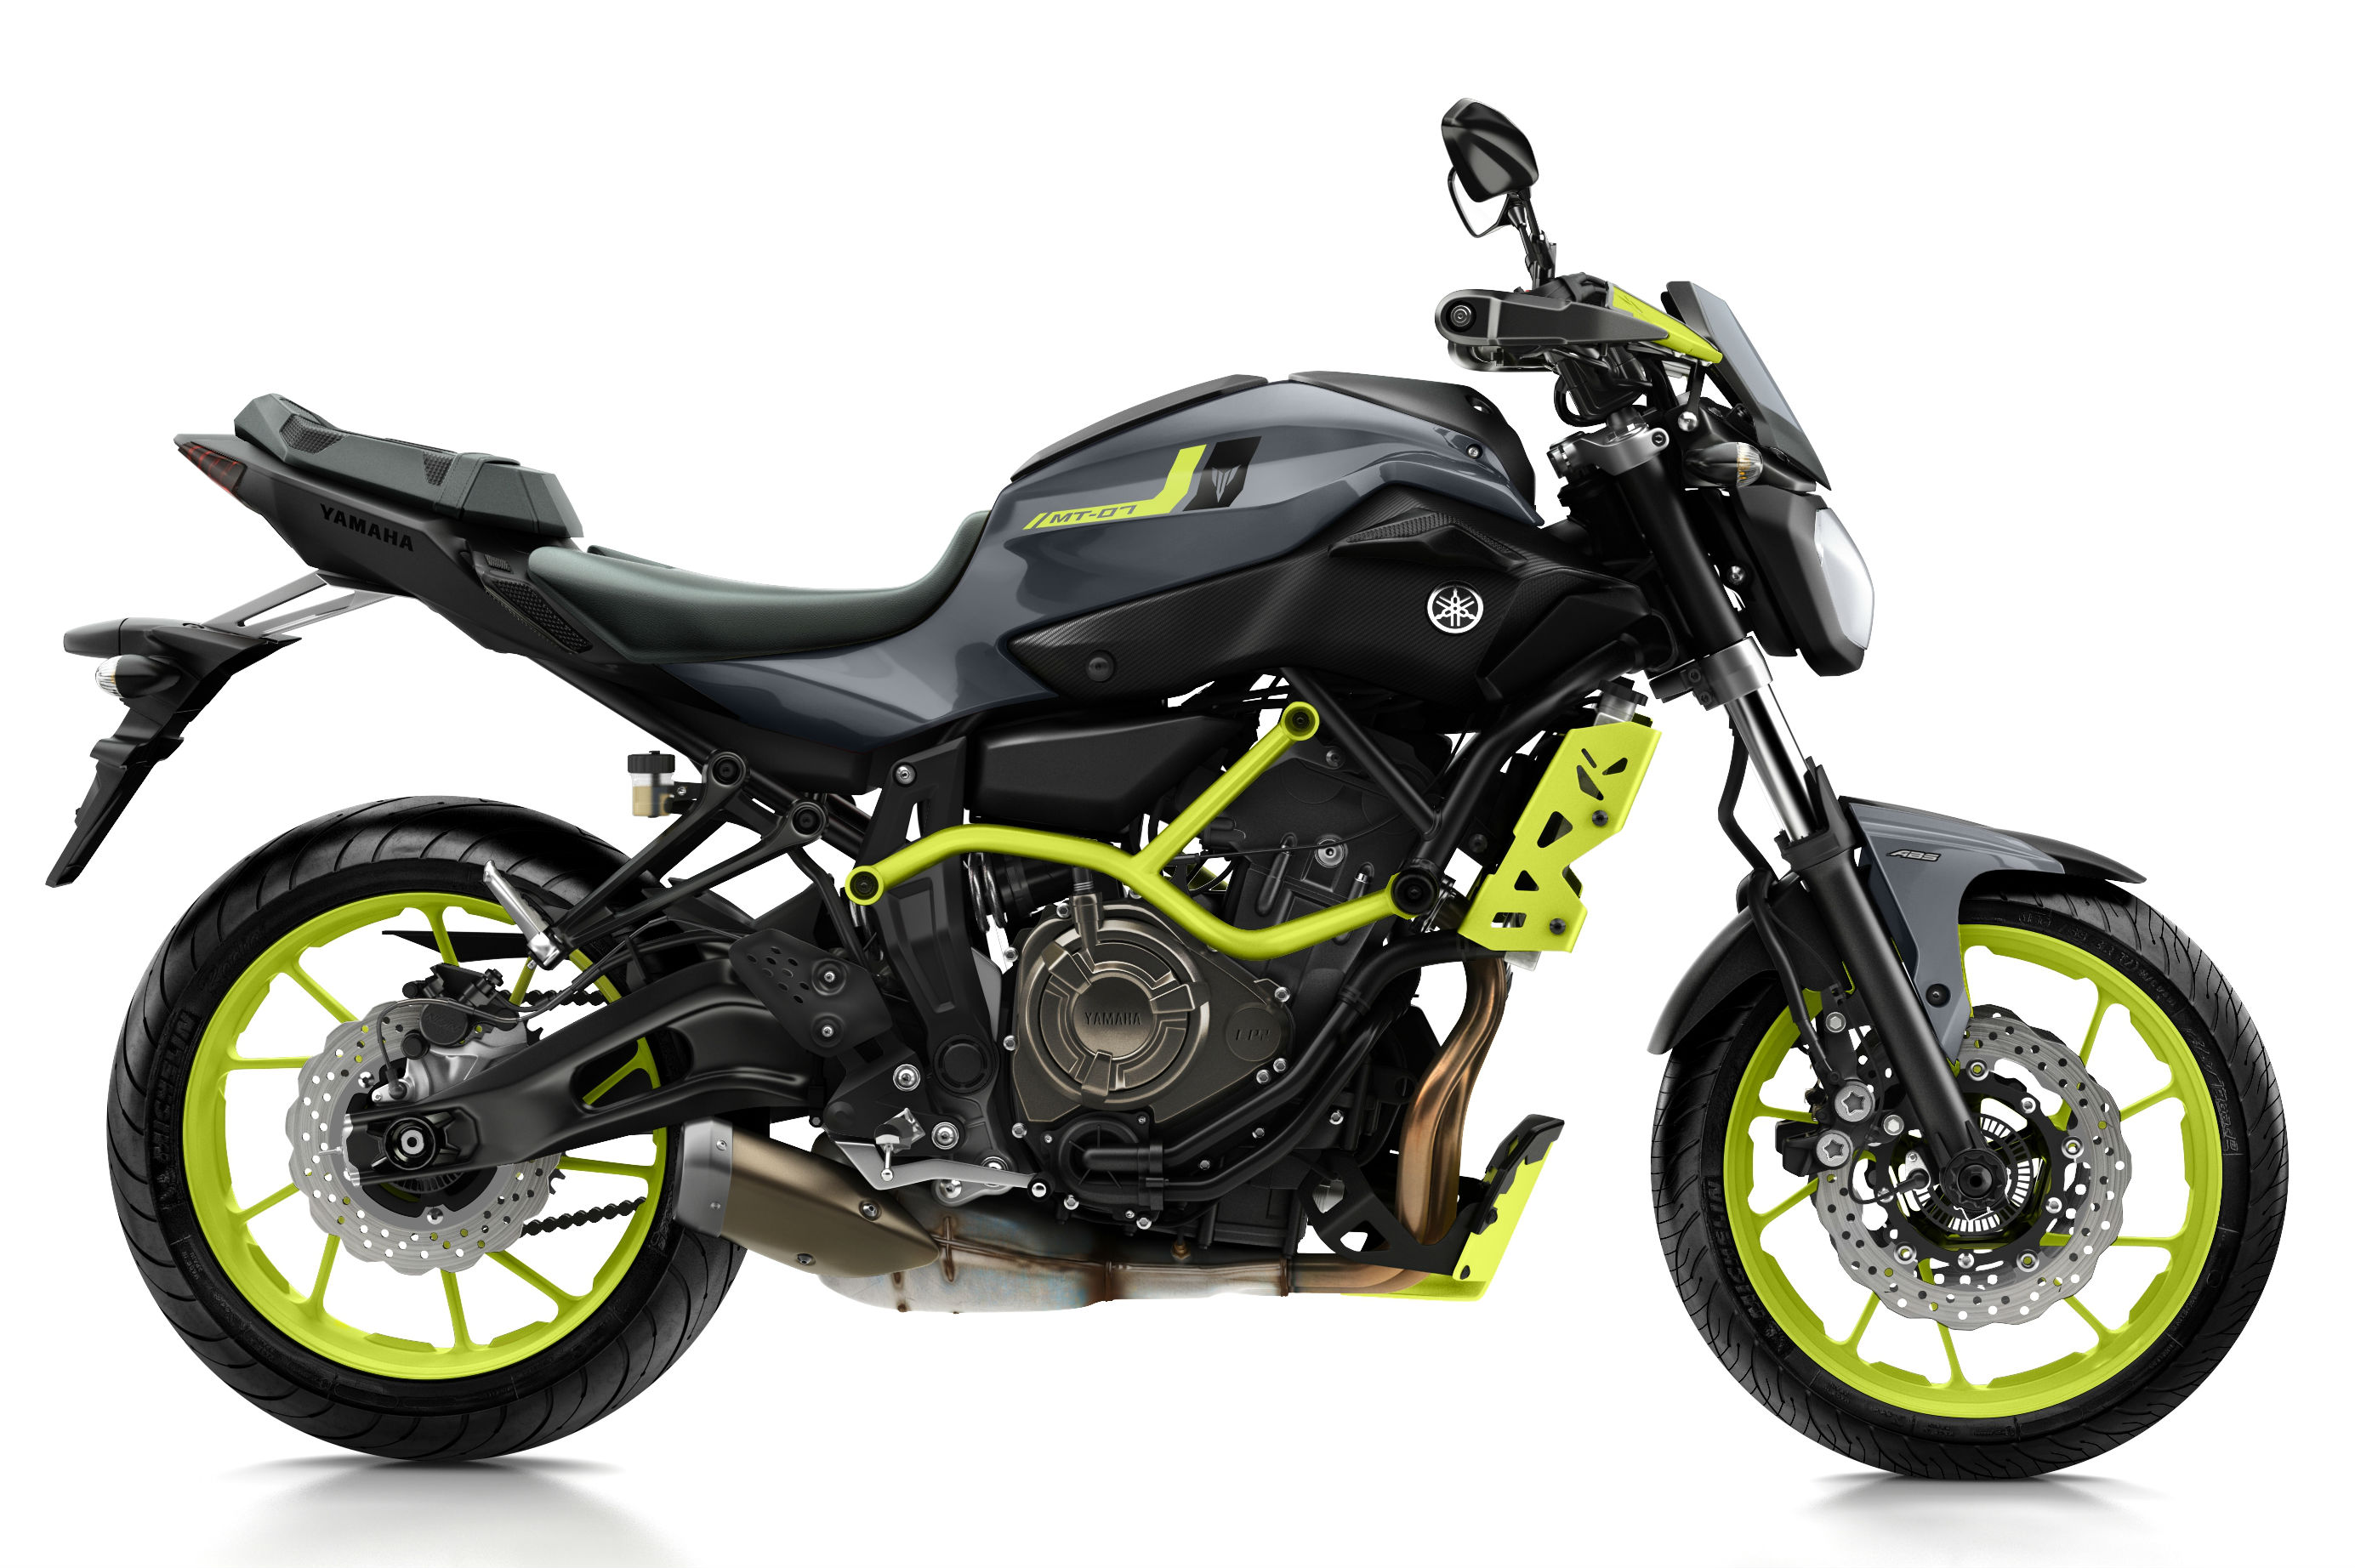 Yamaha MT-07 Estimated Price, Launch Date 2020, Images 